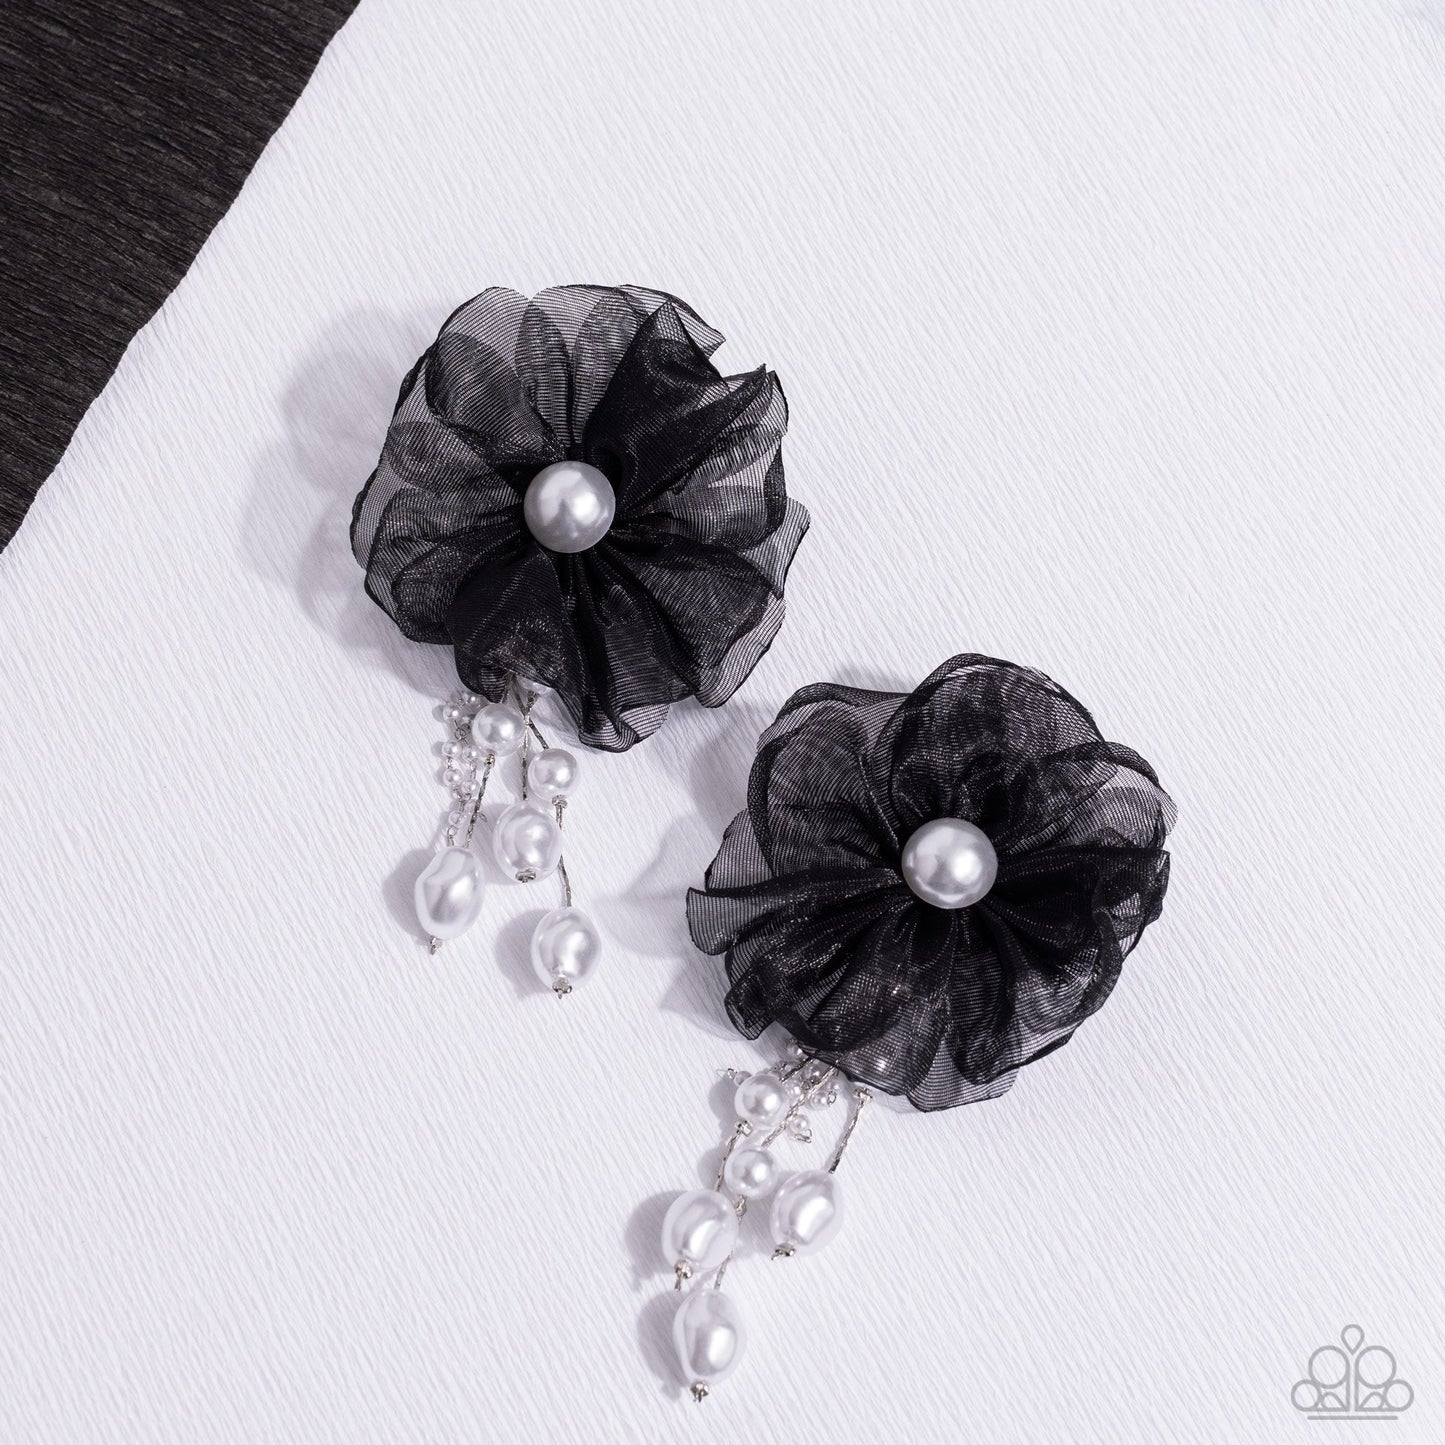 Dripping In Decadence - Black and White Pearl Earrings - Paparazzi Accessories - Folds of black netting gather around a glossy white pearl center, creating a spunky blossom. Cascading from the black netted petals, various white pearls in glossy, baroque, and dainty settings are infused along silver cobra chains for a refined finish. Earring attaches to a standard post fitting. Sold as one pair of post earrings.